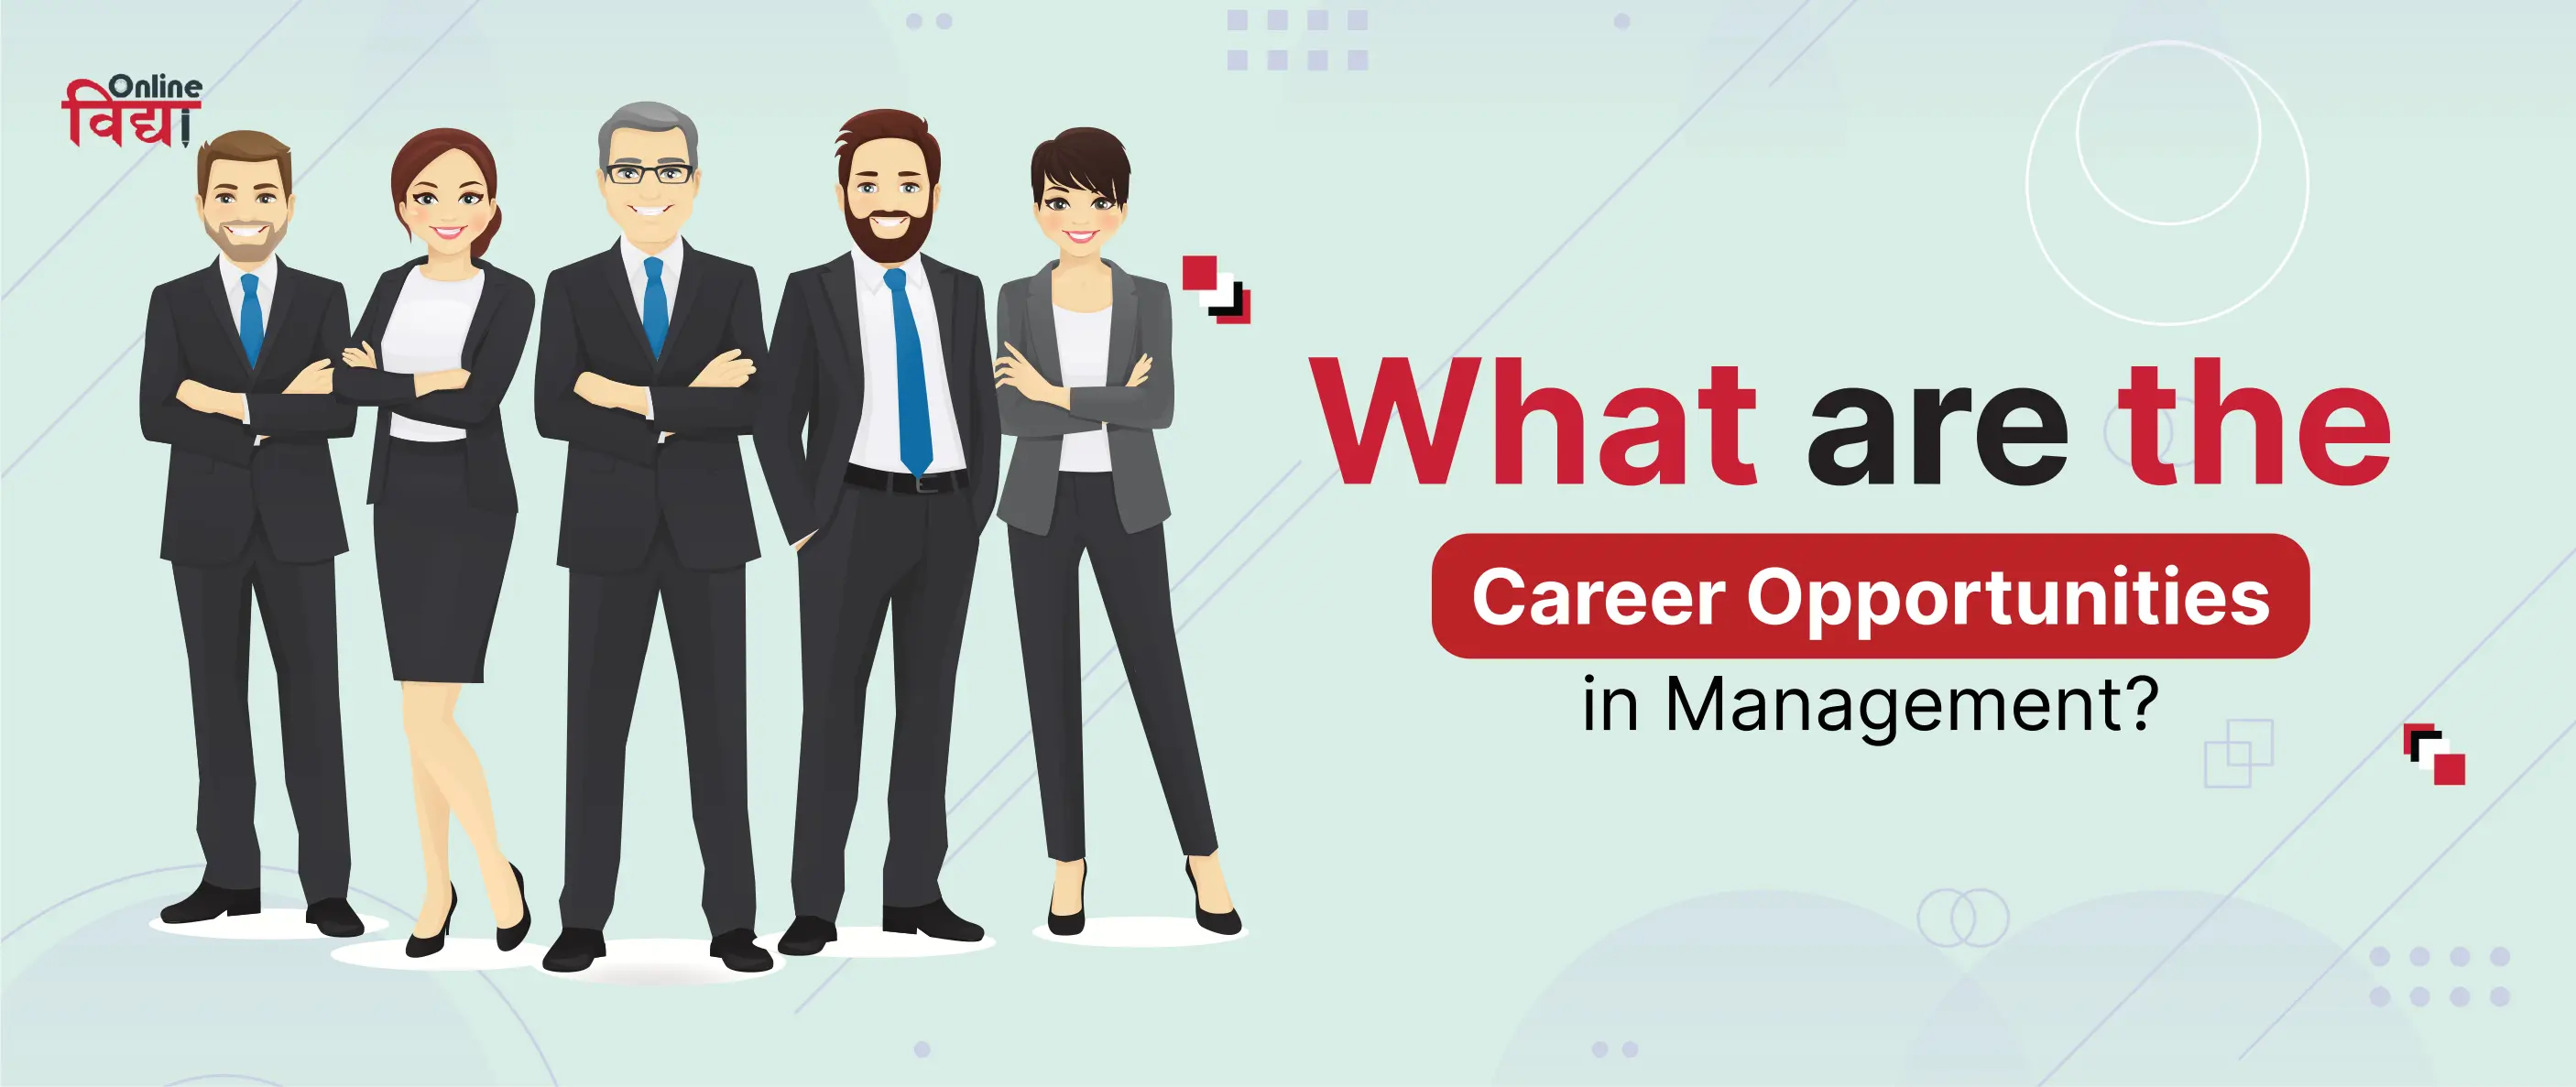 What are the Career Opportunities in Management?